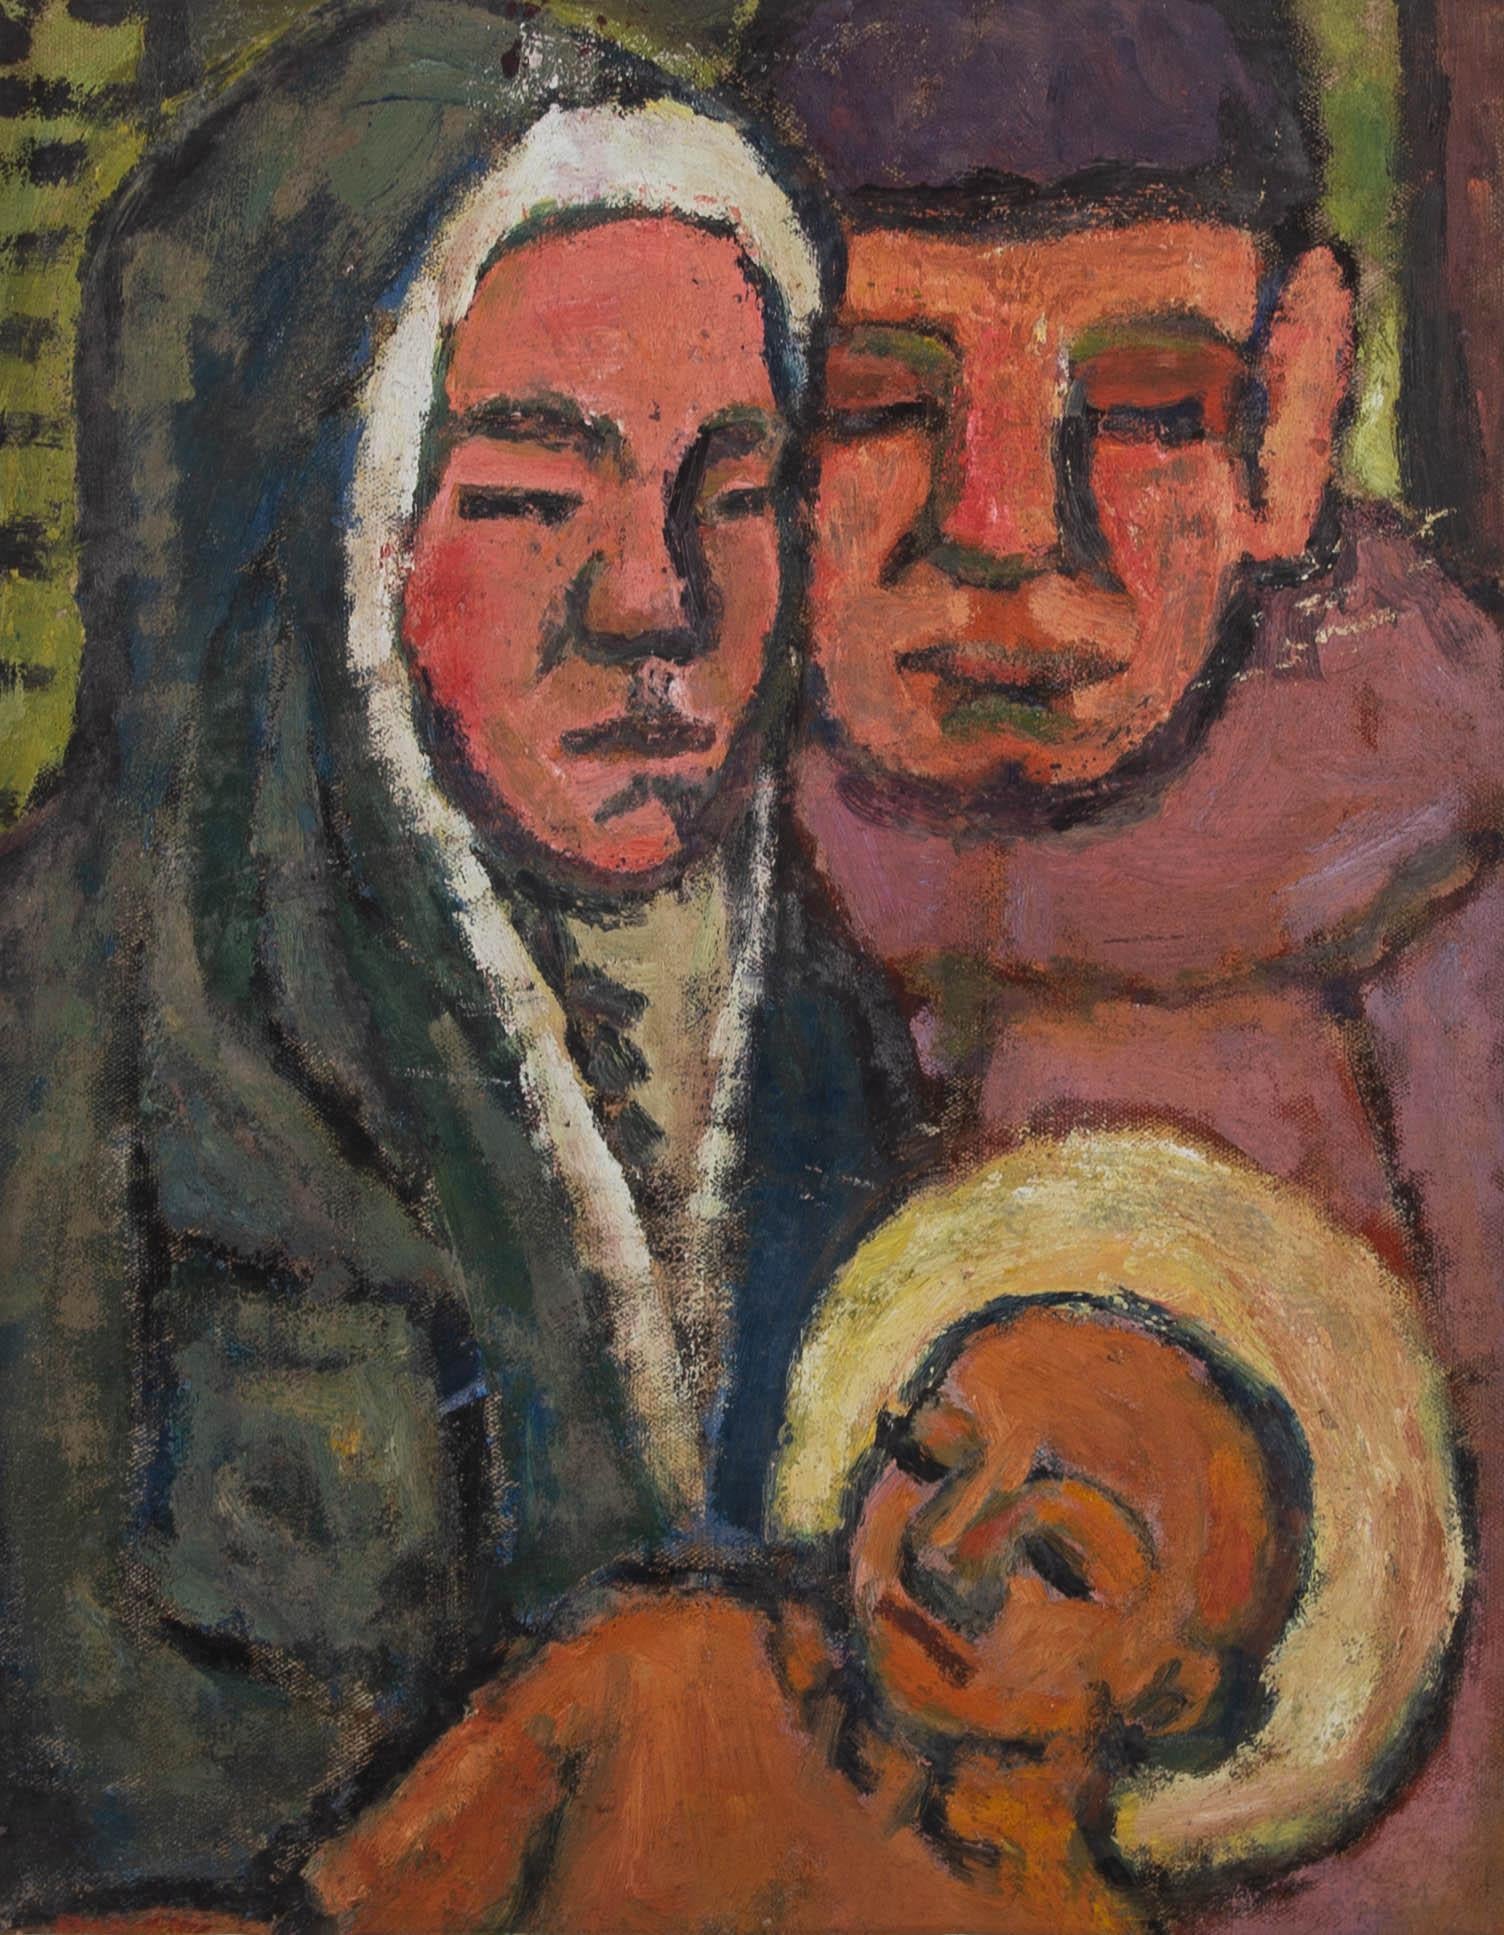 A beautiful and warm family portrait of Mary, Joseph and infant Jesus. The artist has used simplistic form and earthy colours to add an element of humility and groundedness to the sanctified family.

The painting is on canvas, cut from its